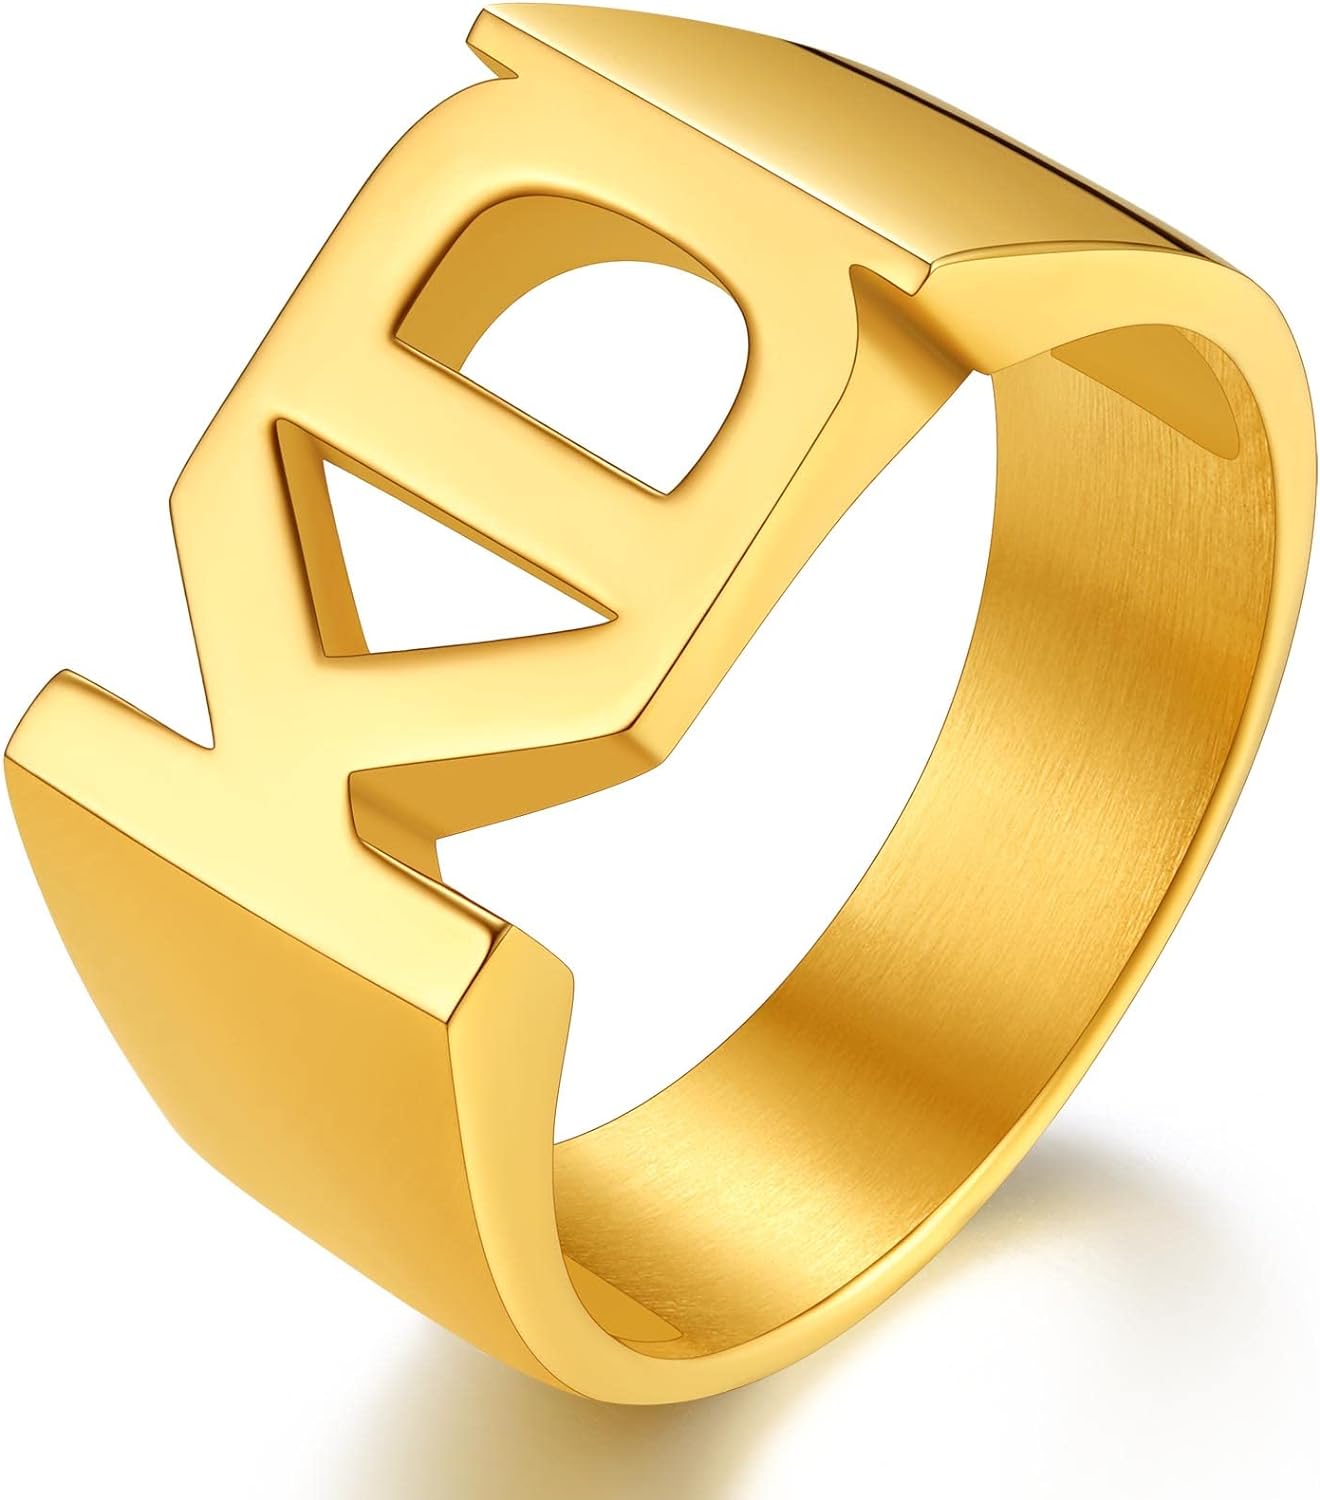 ChainsProMen/Women Personalized Name Ring Initial Rings, Customized Name Gift, Stainless Steel/Gold Plated/Black-Send Gift Box